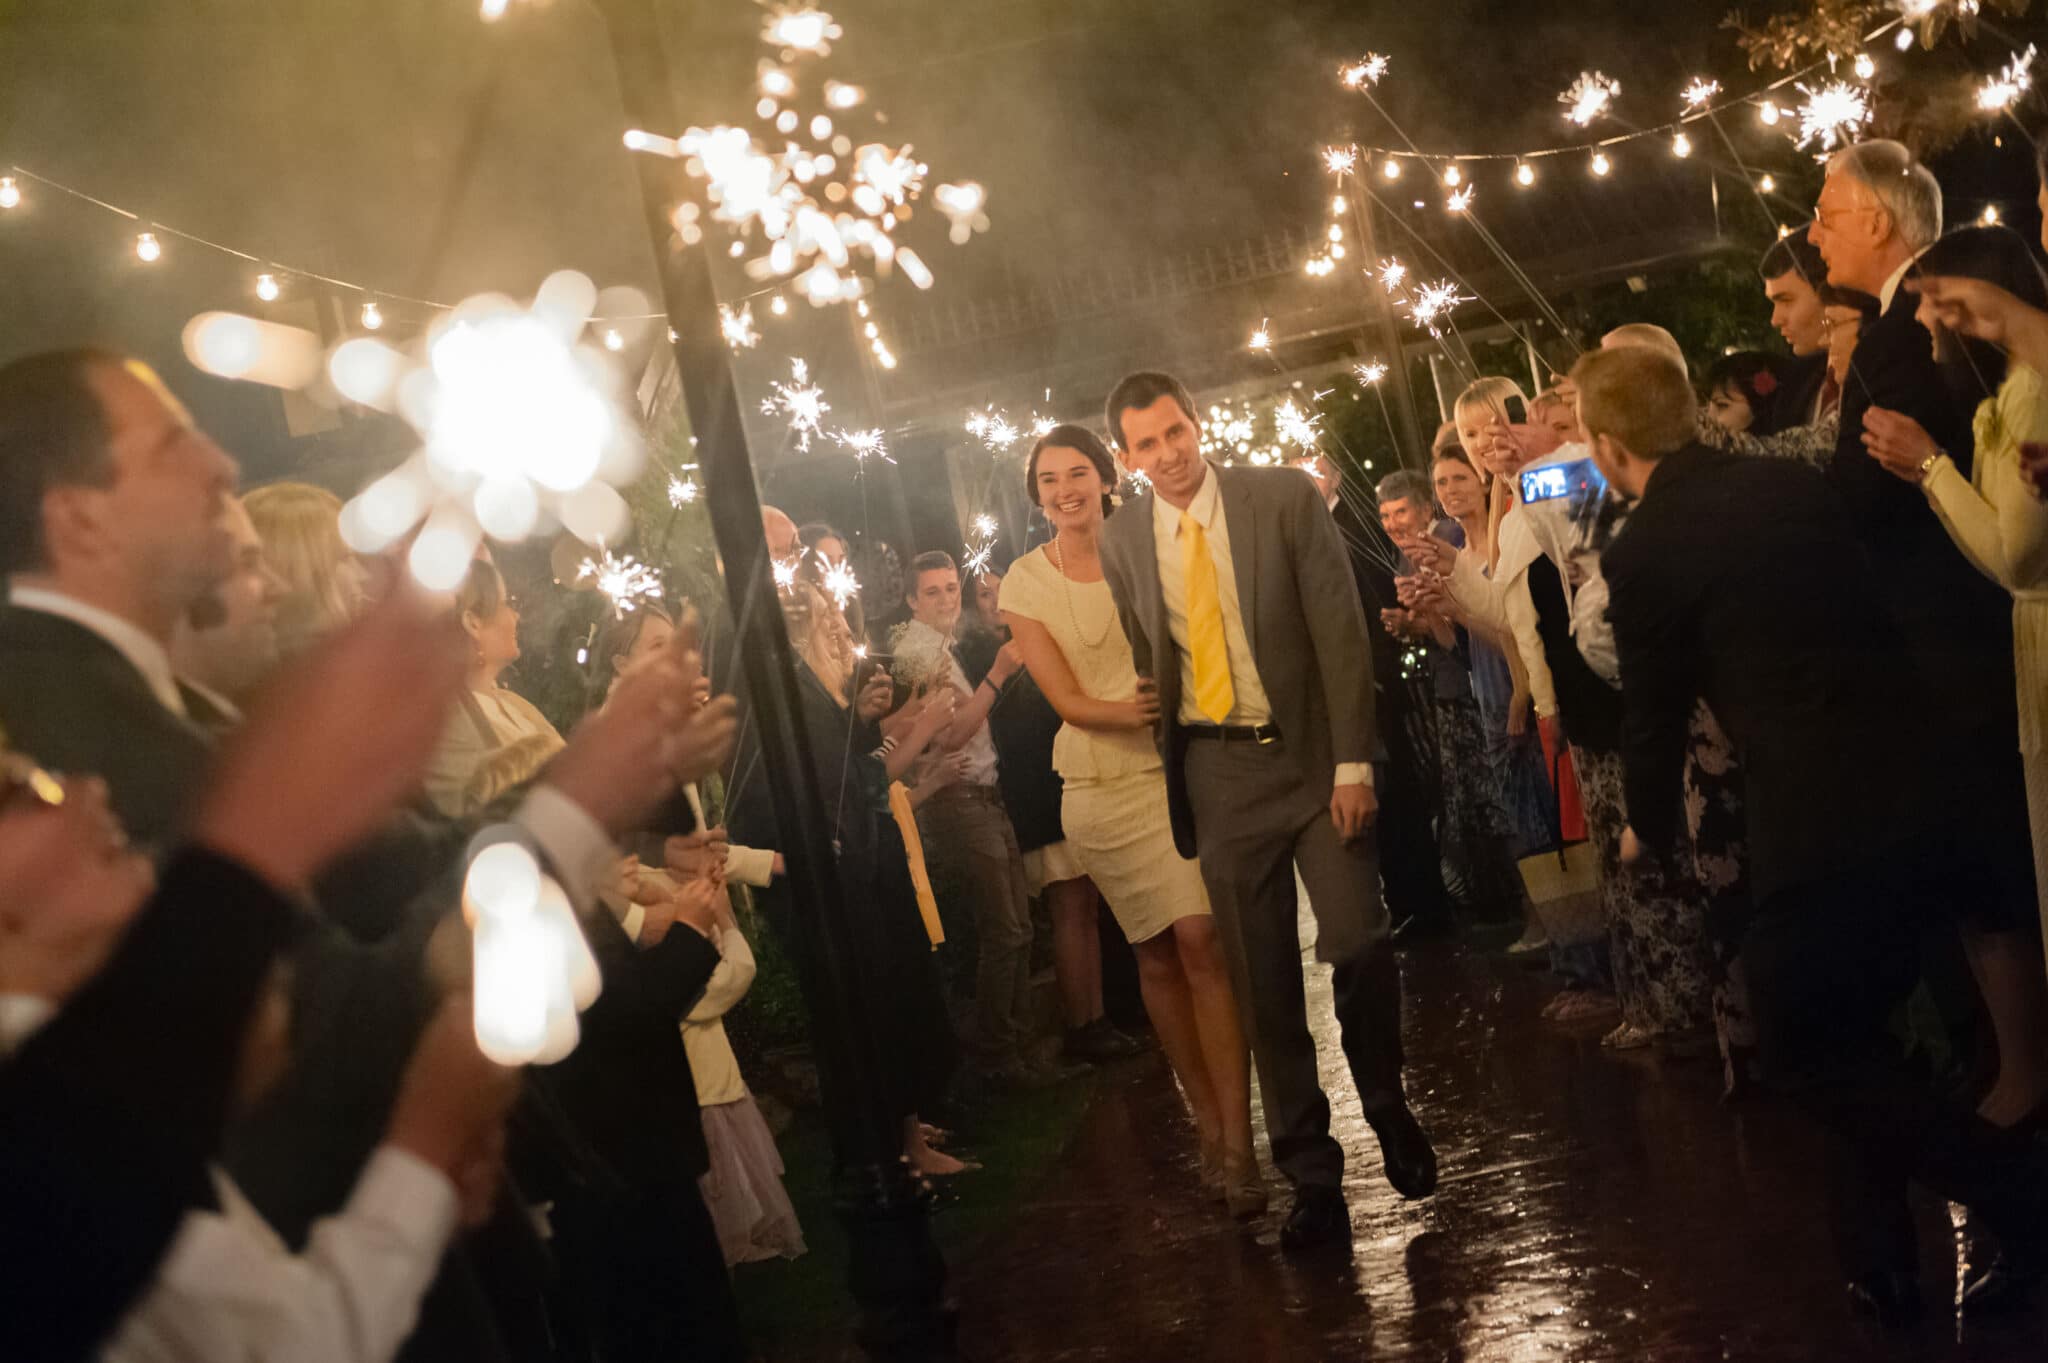 The bride and groom exit their wedding amid sparklers held by family and friends.